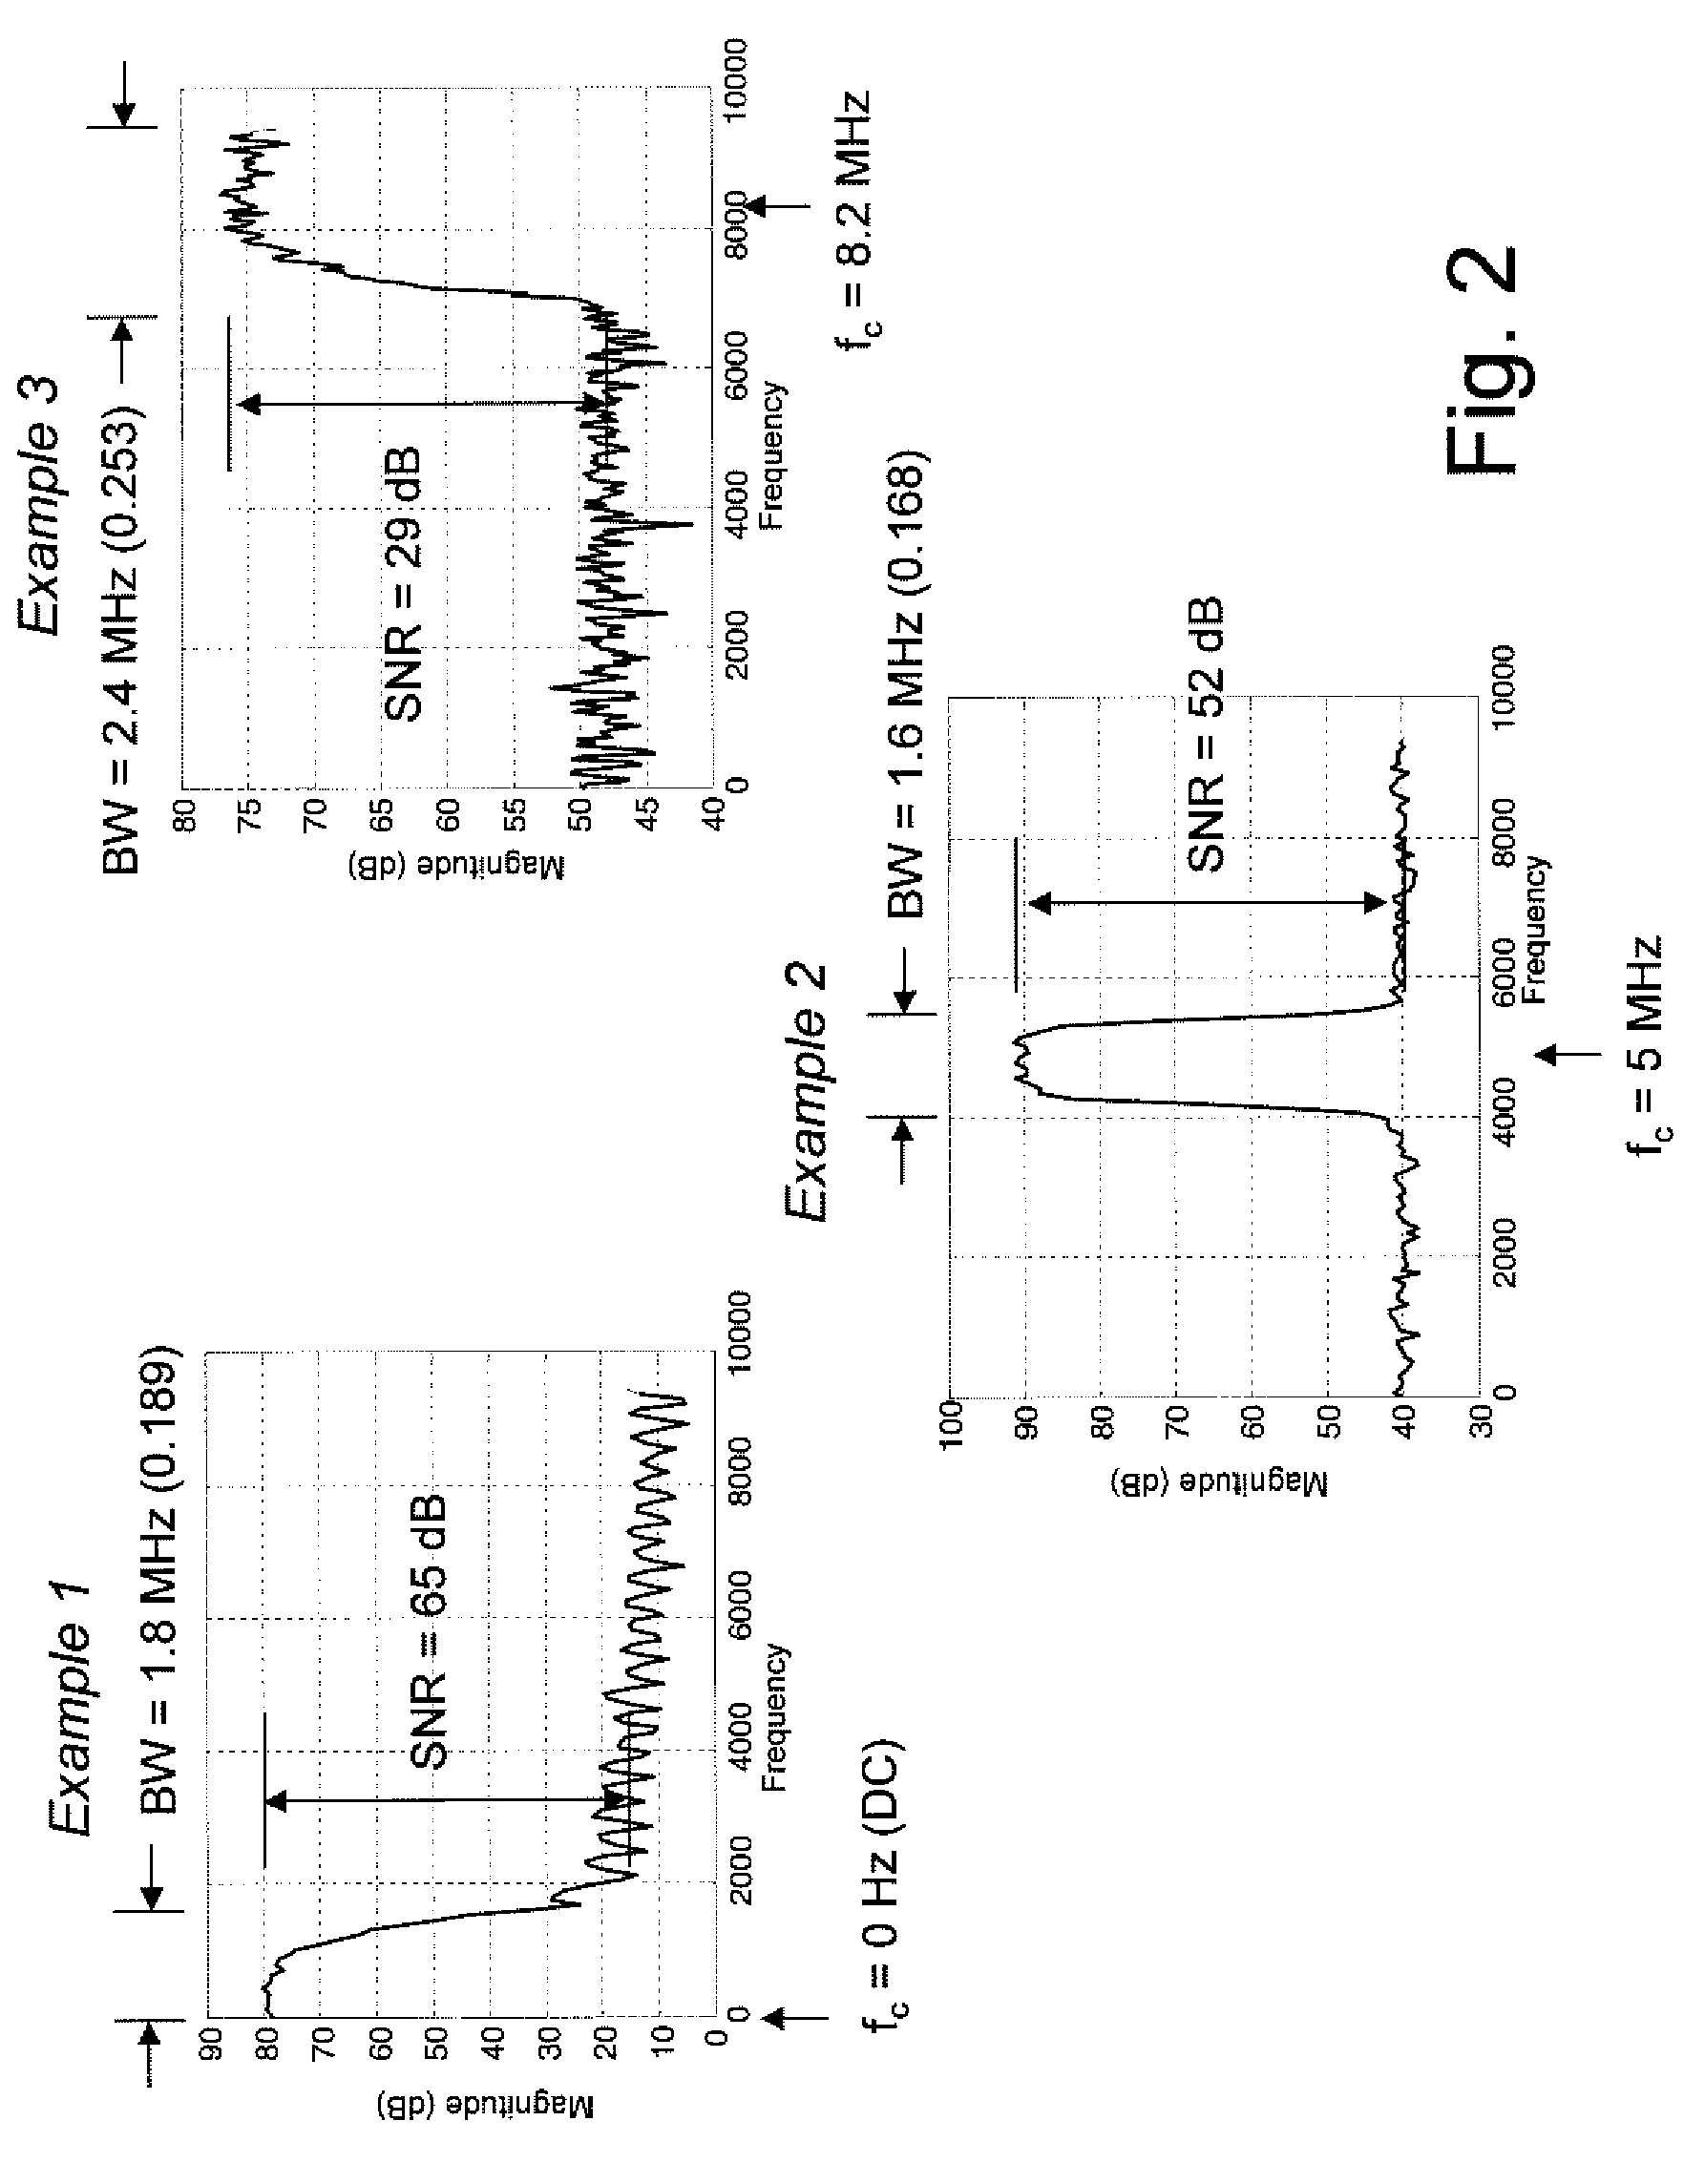 Enhanced data converters using compression and decompression